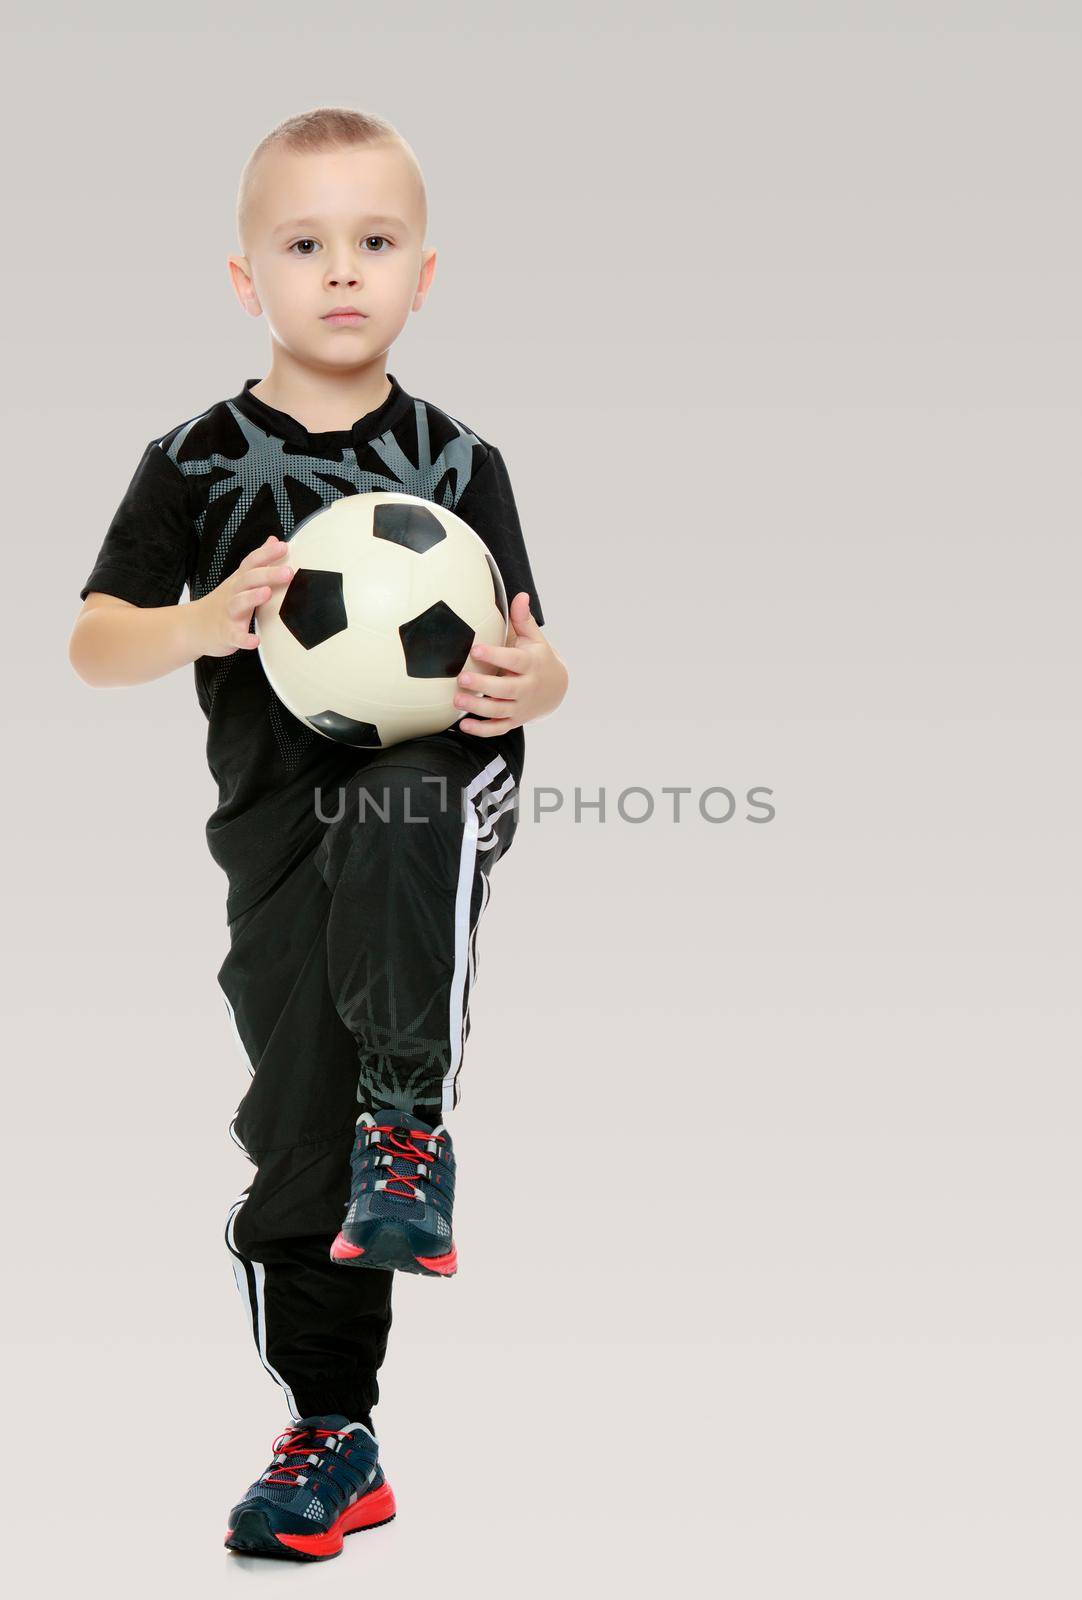 The little boy with the ball in his hands by kolesnikov_studio